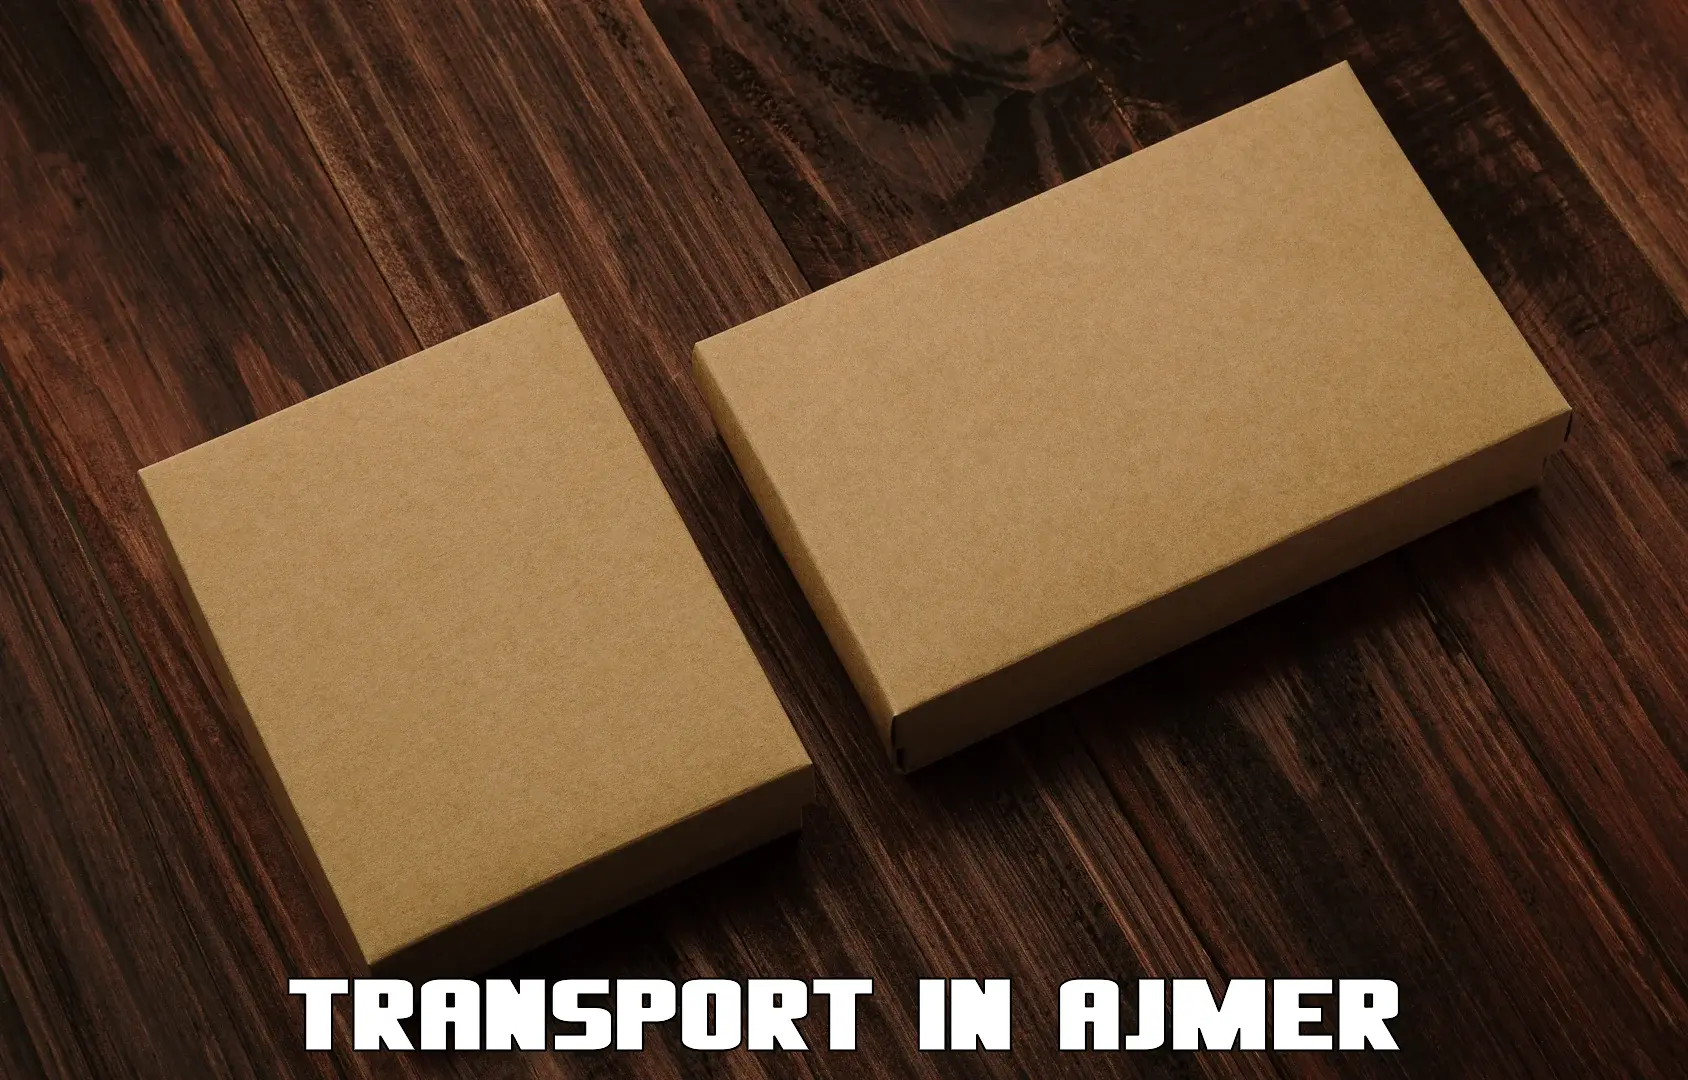 Vehicle transport services in Ajmer